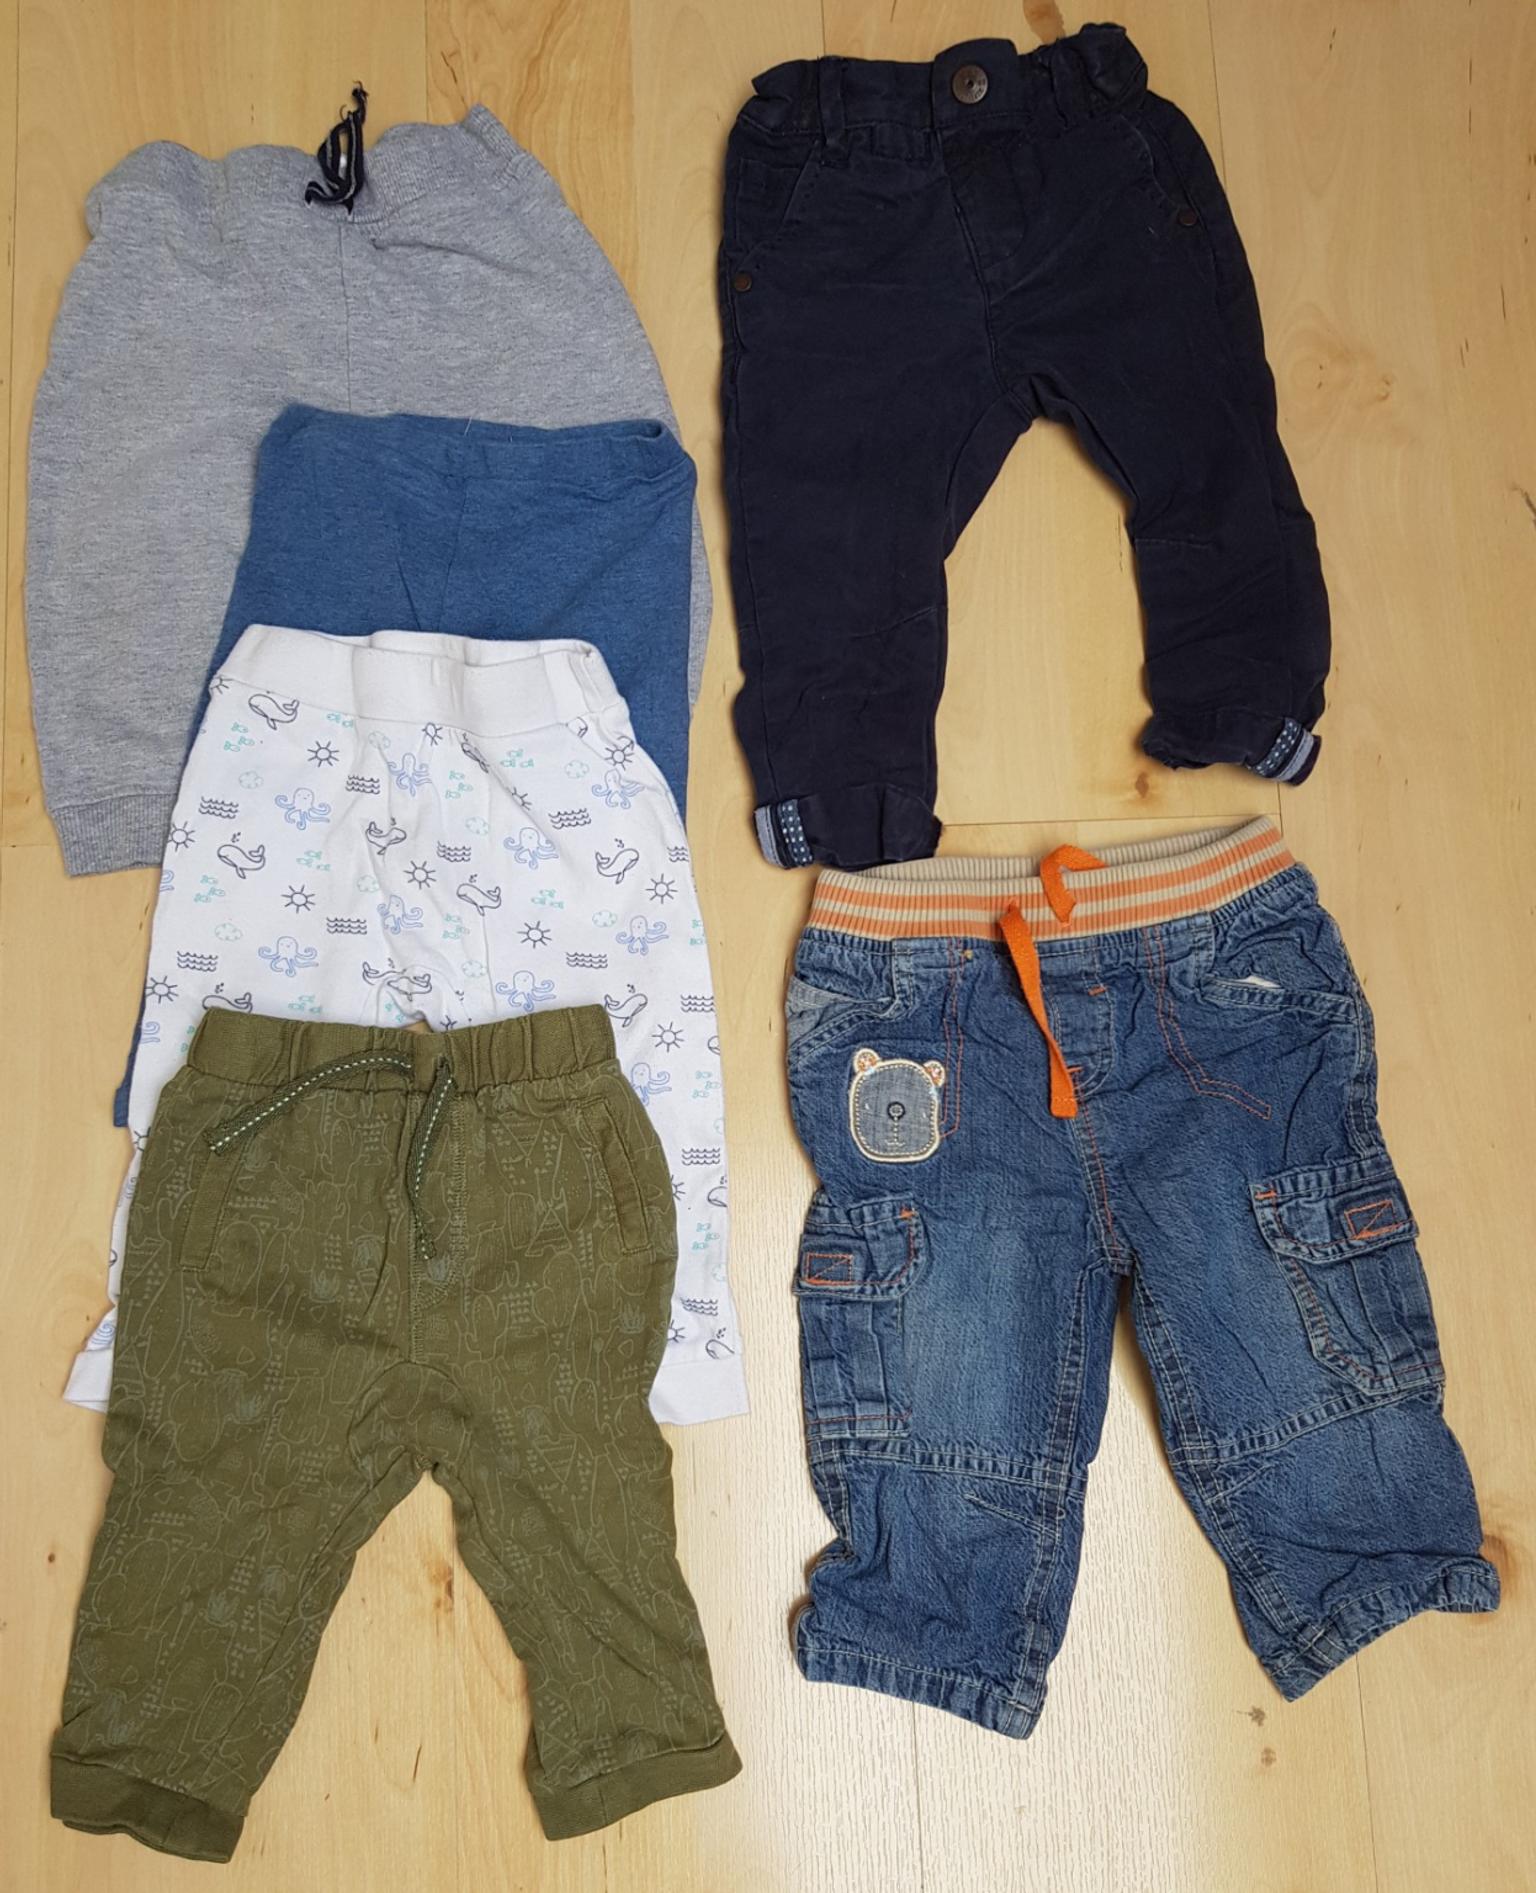 Baby Boy 6-9 month Clothes bundle in NG8 Nottingham for £15.00 for sale ...